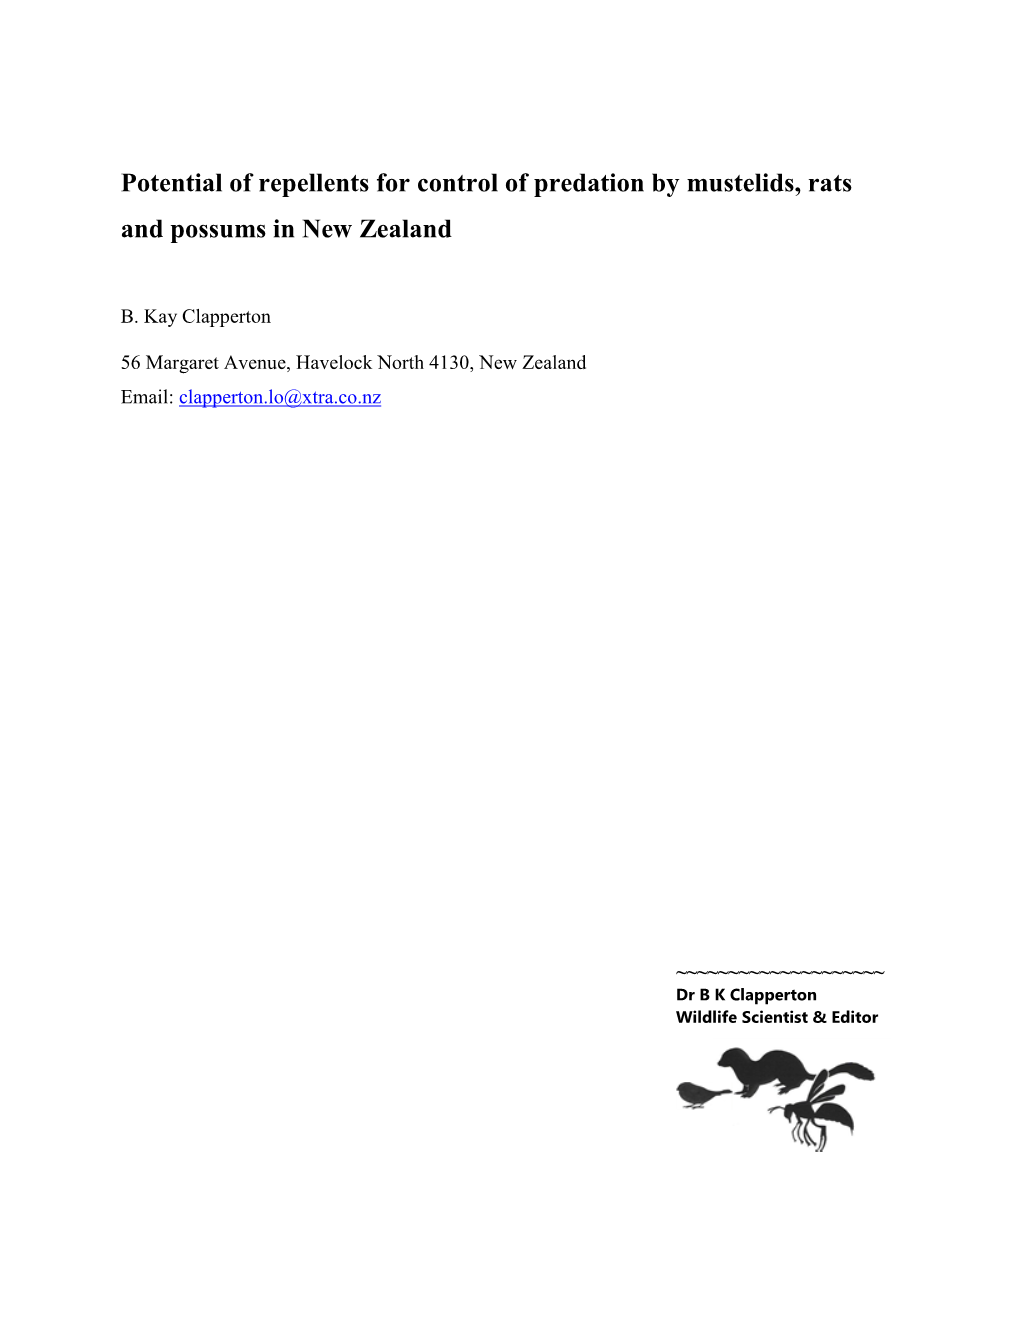 Potential of Repellents for Control of Predation by Mustelids, Rats and Possums in New Zealand